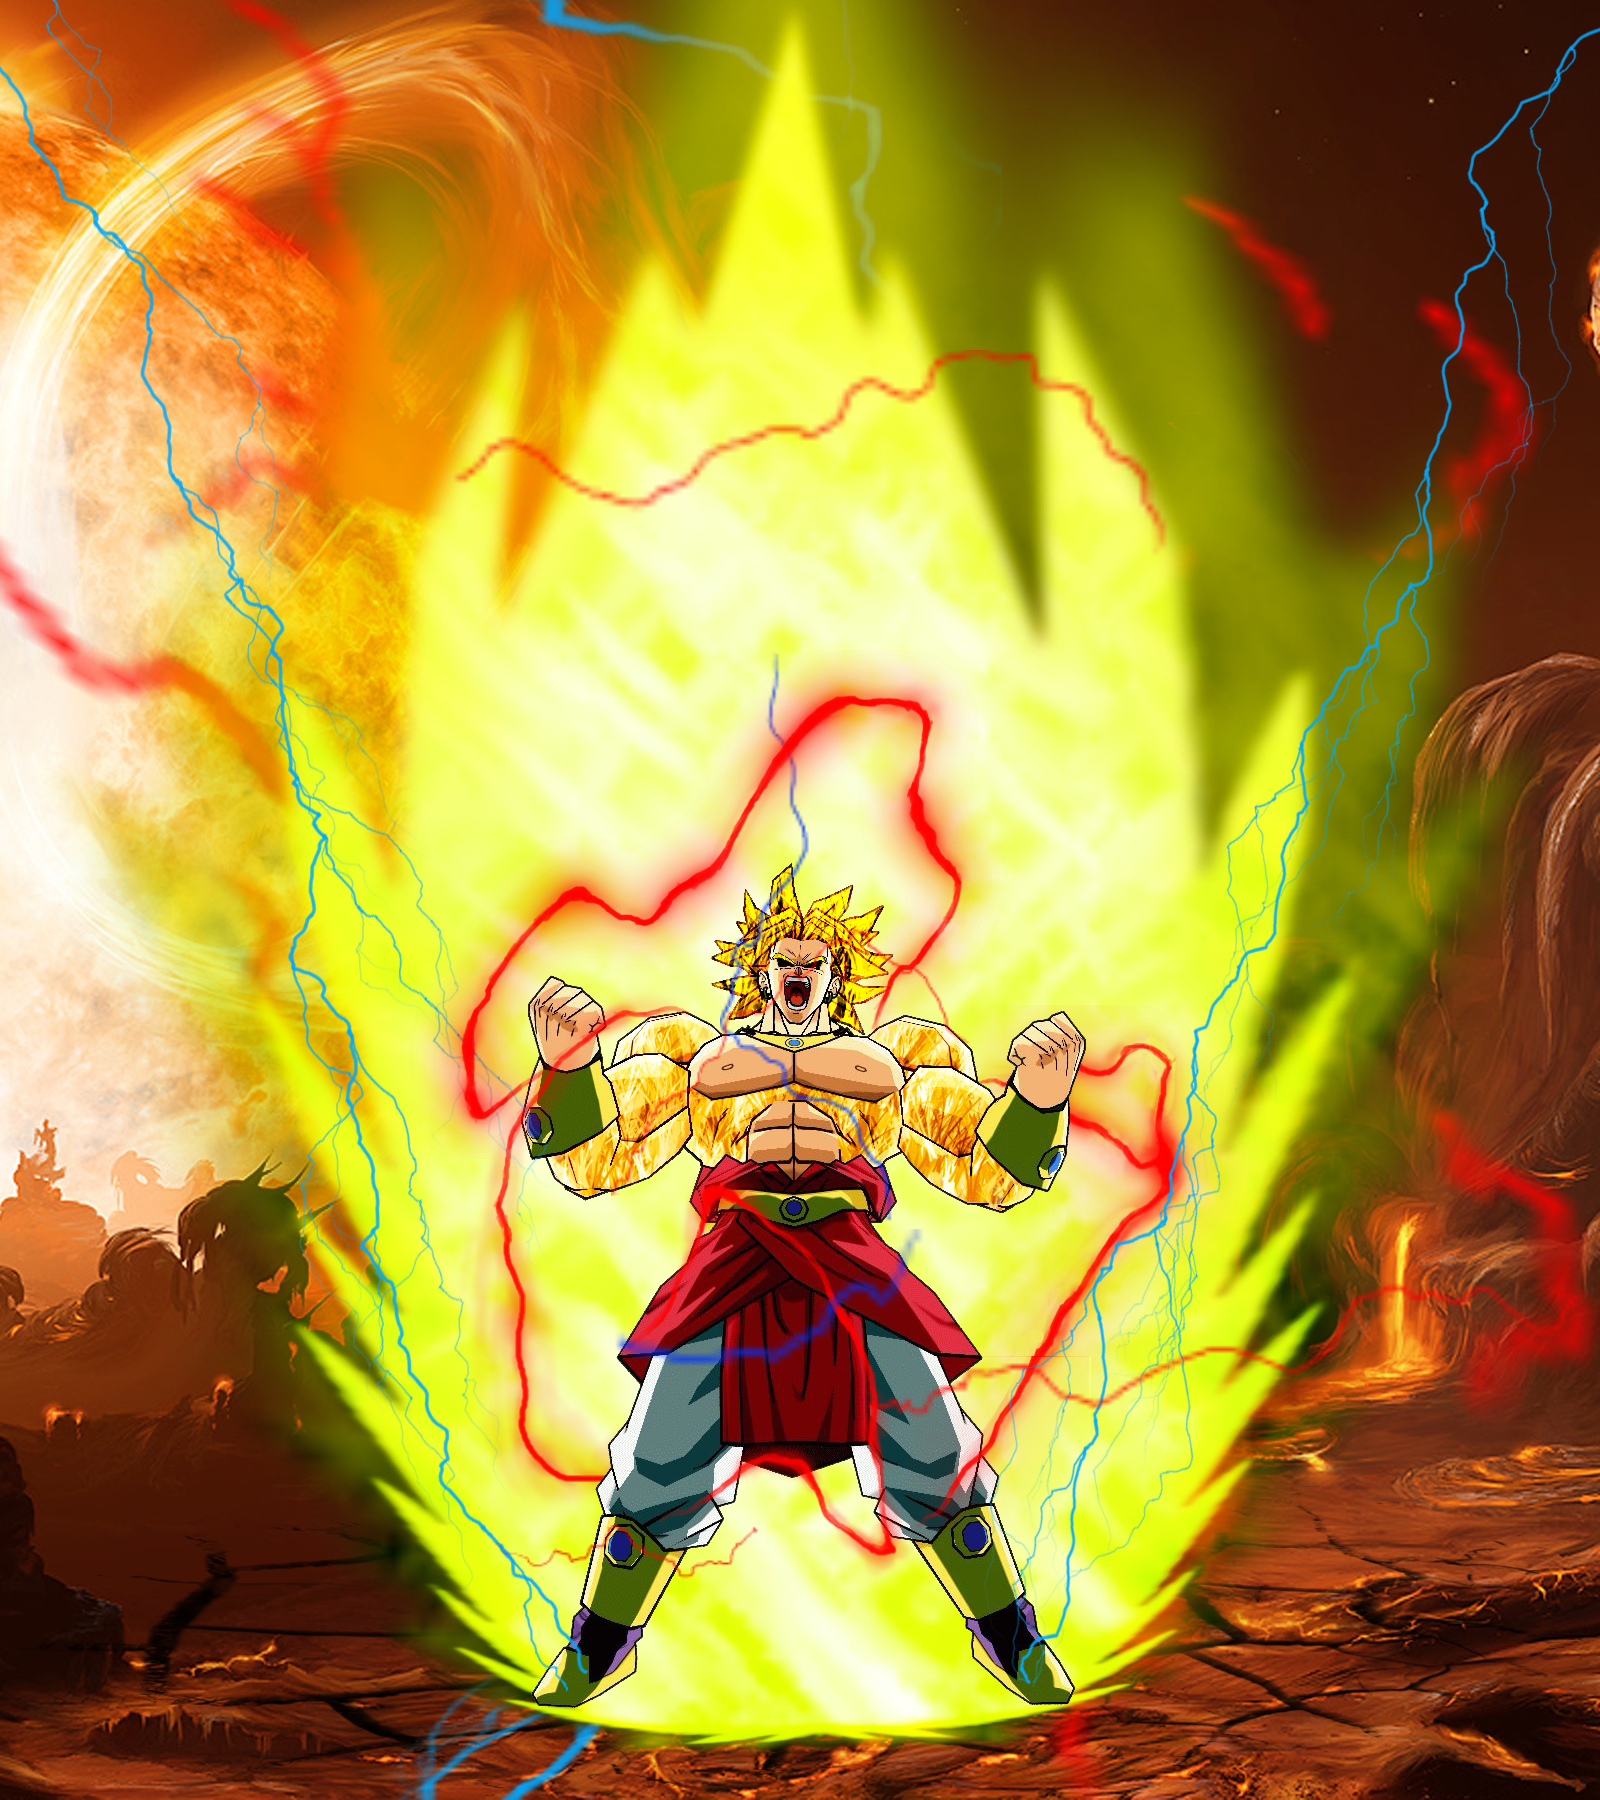 broly_ssj6__s_awesome_power_by_nassif9000-d4kmcnk.png